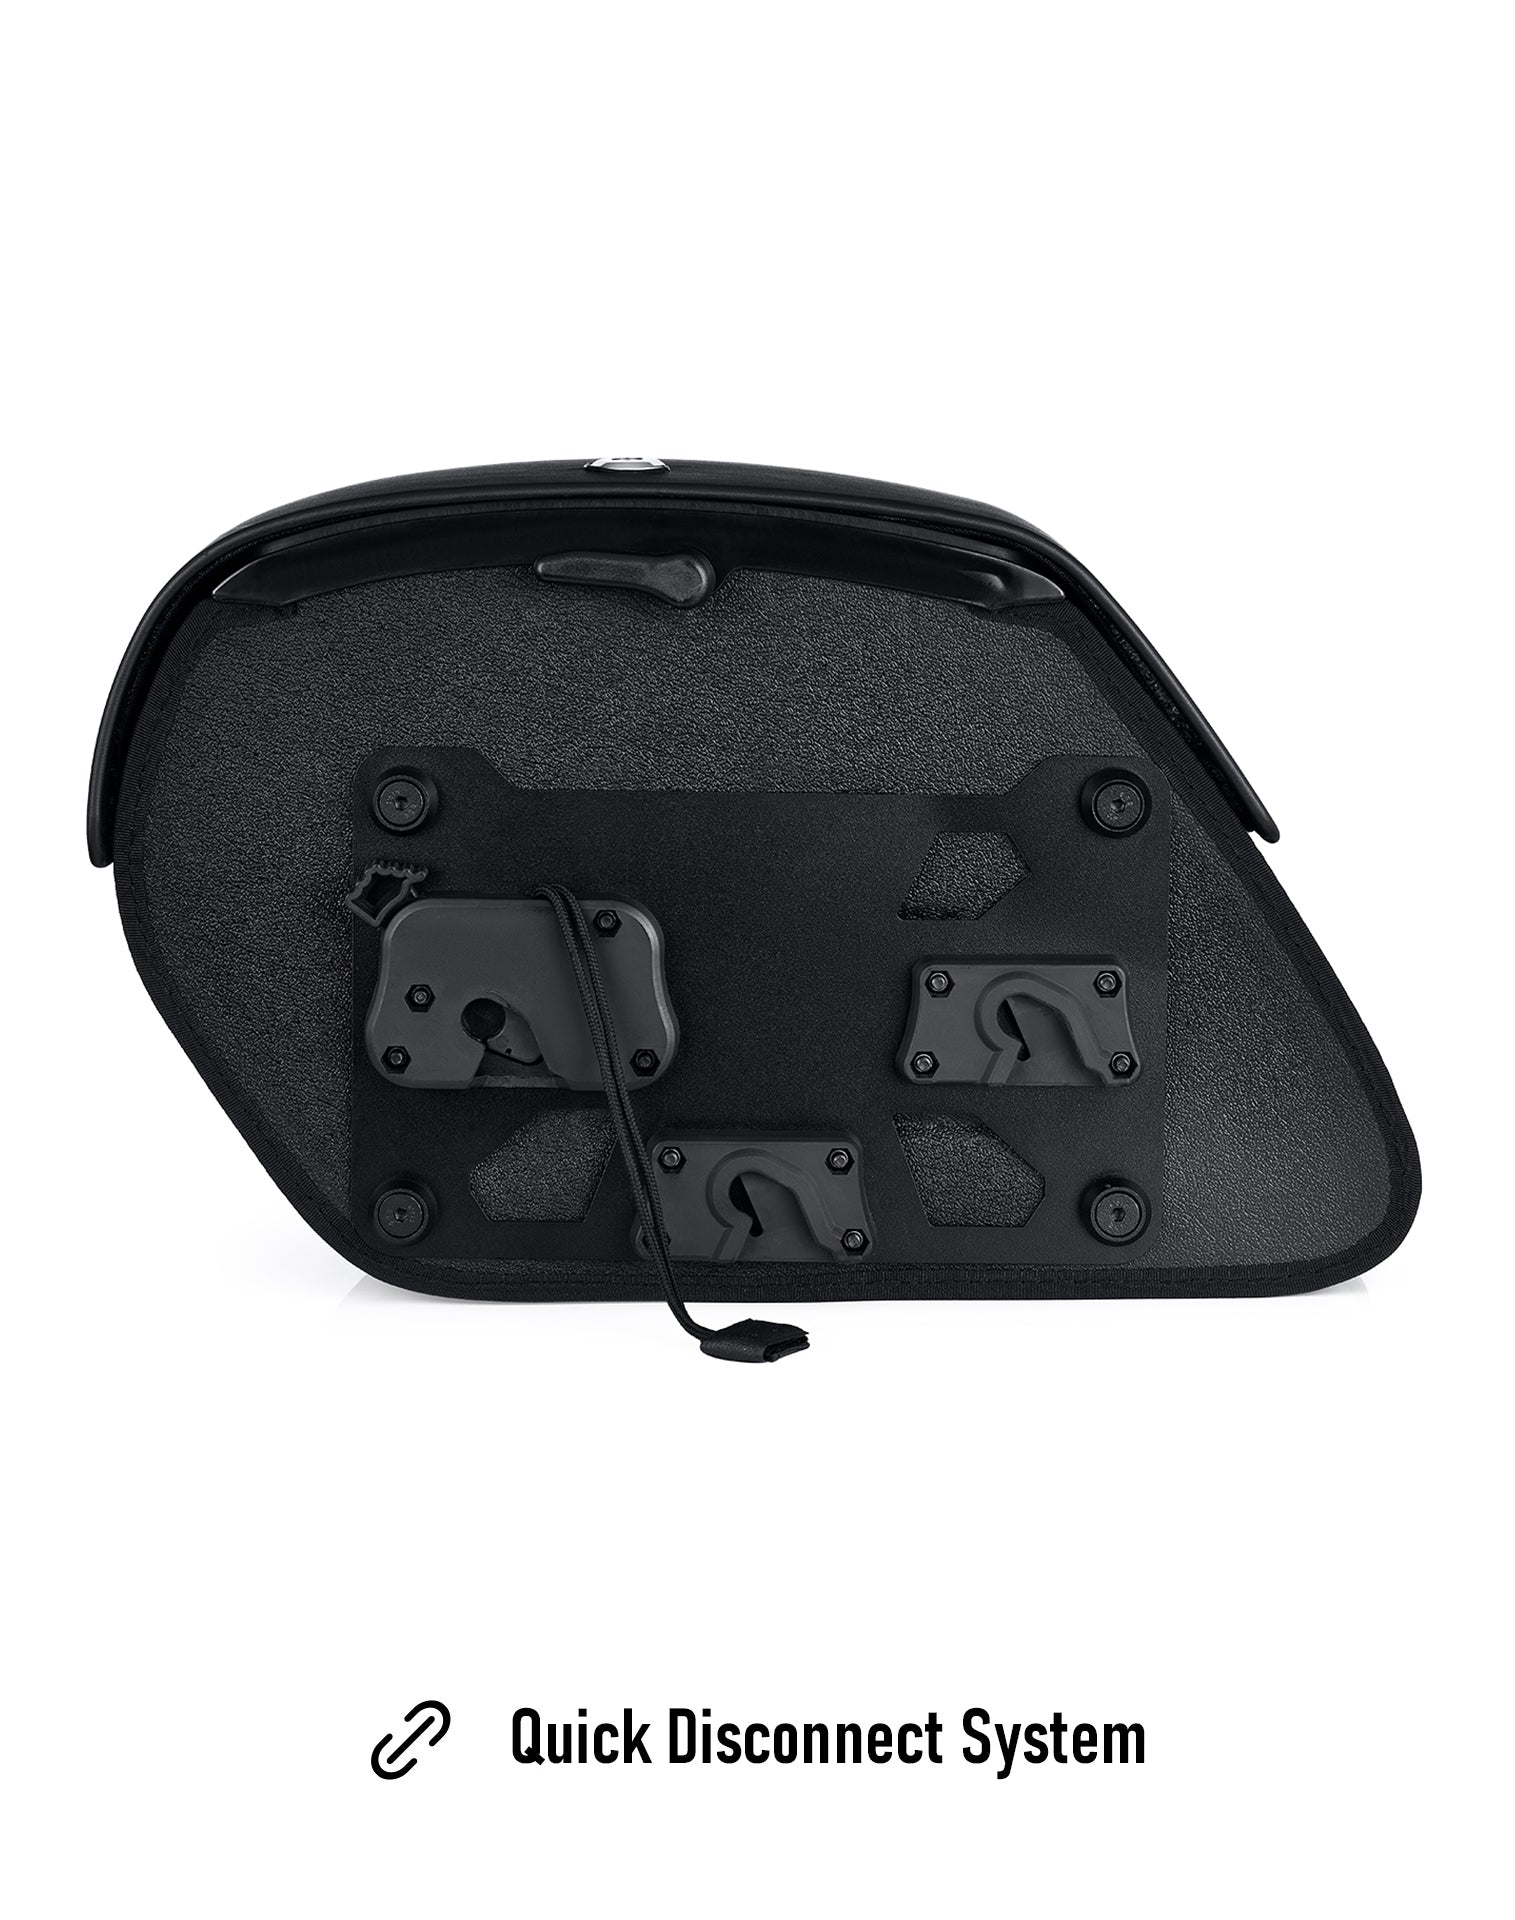 22L - Warrior Medium Quick-Mount Motorcycle Saddlebags For Harley Sportster 883 Custom XL883C Quick Disconnect System